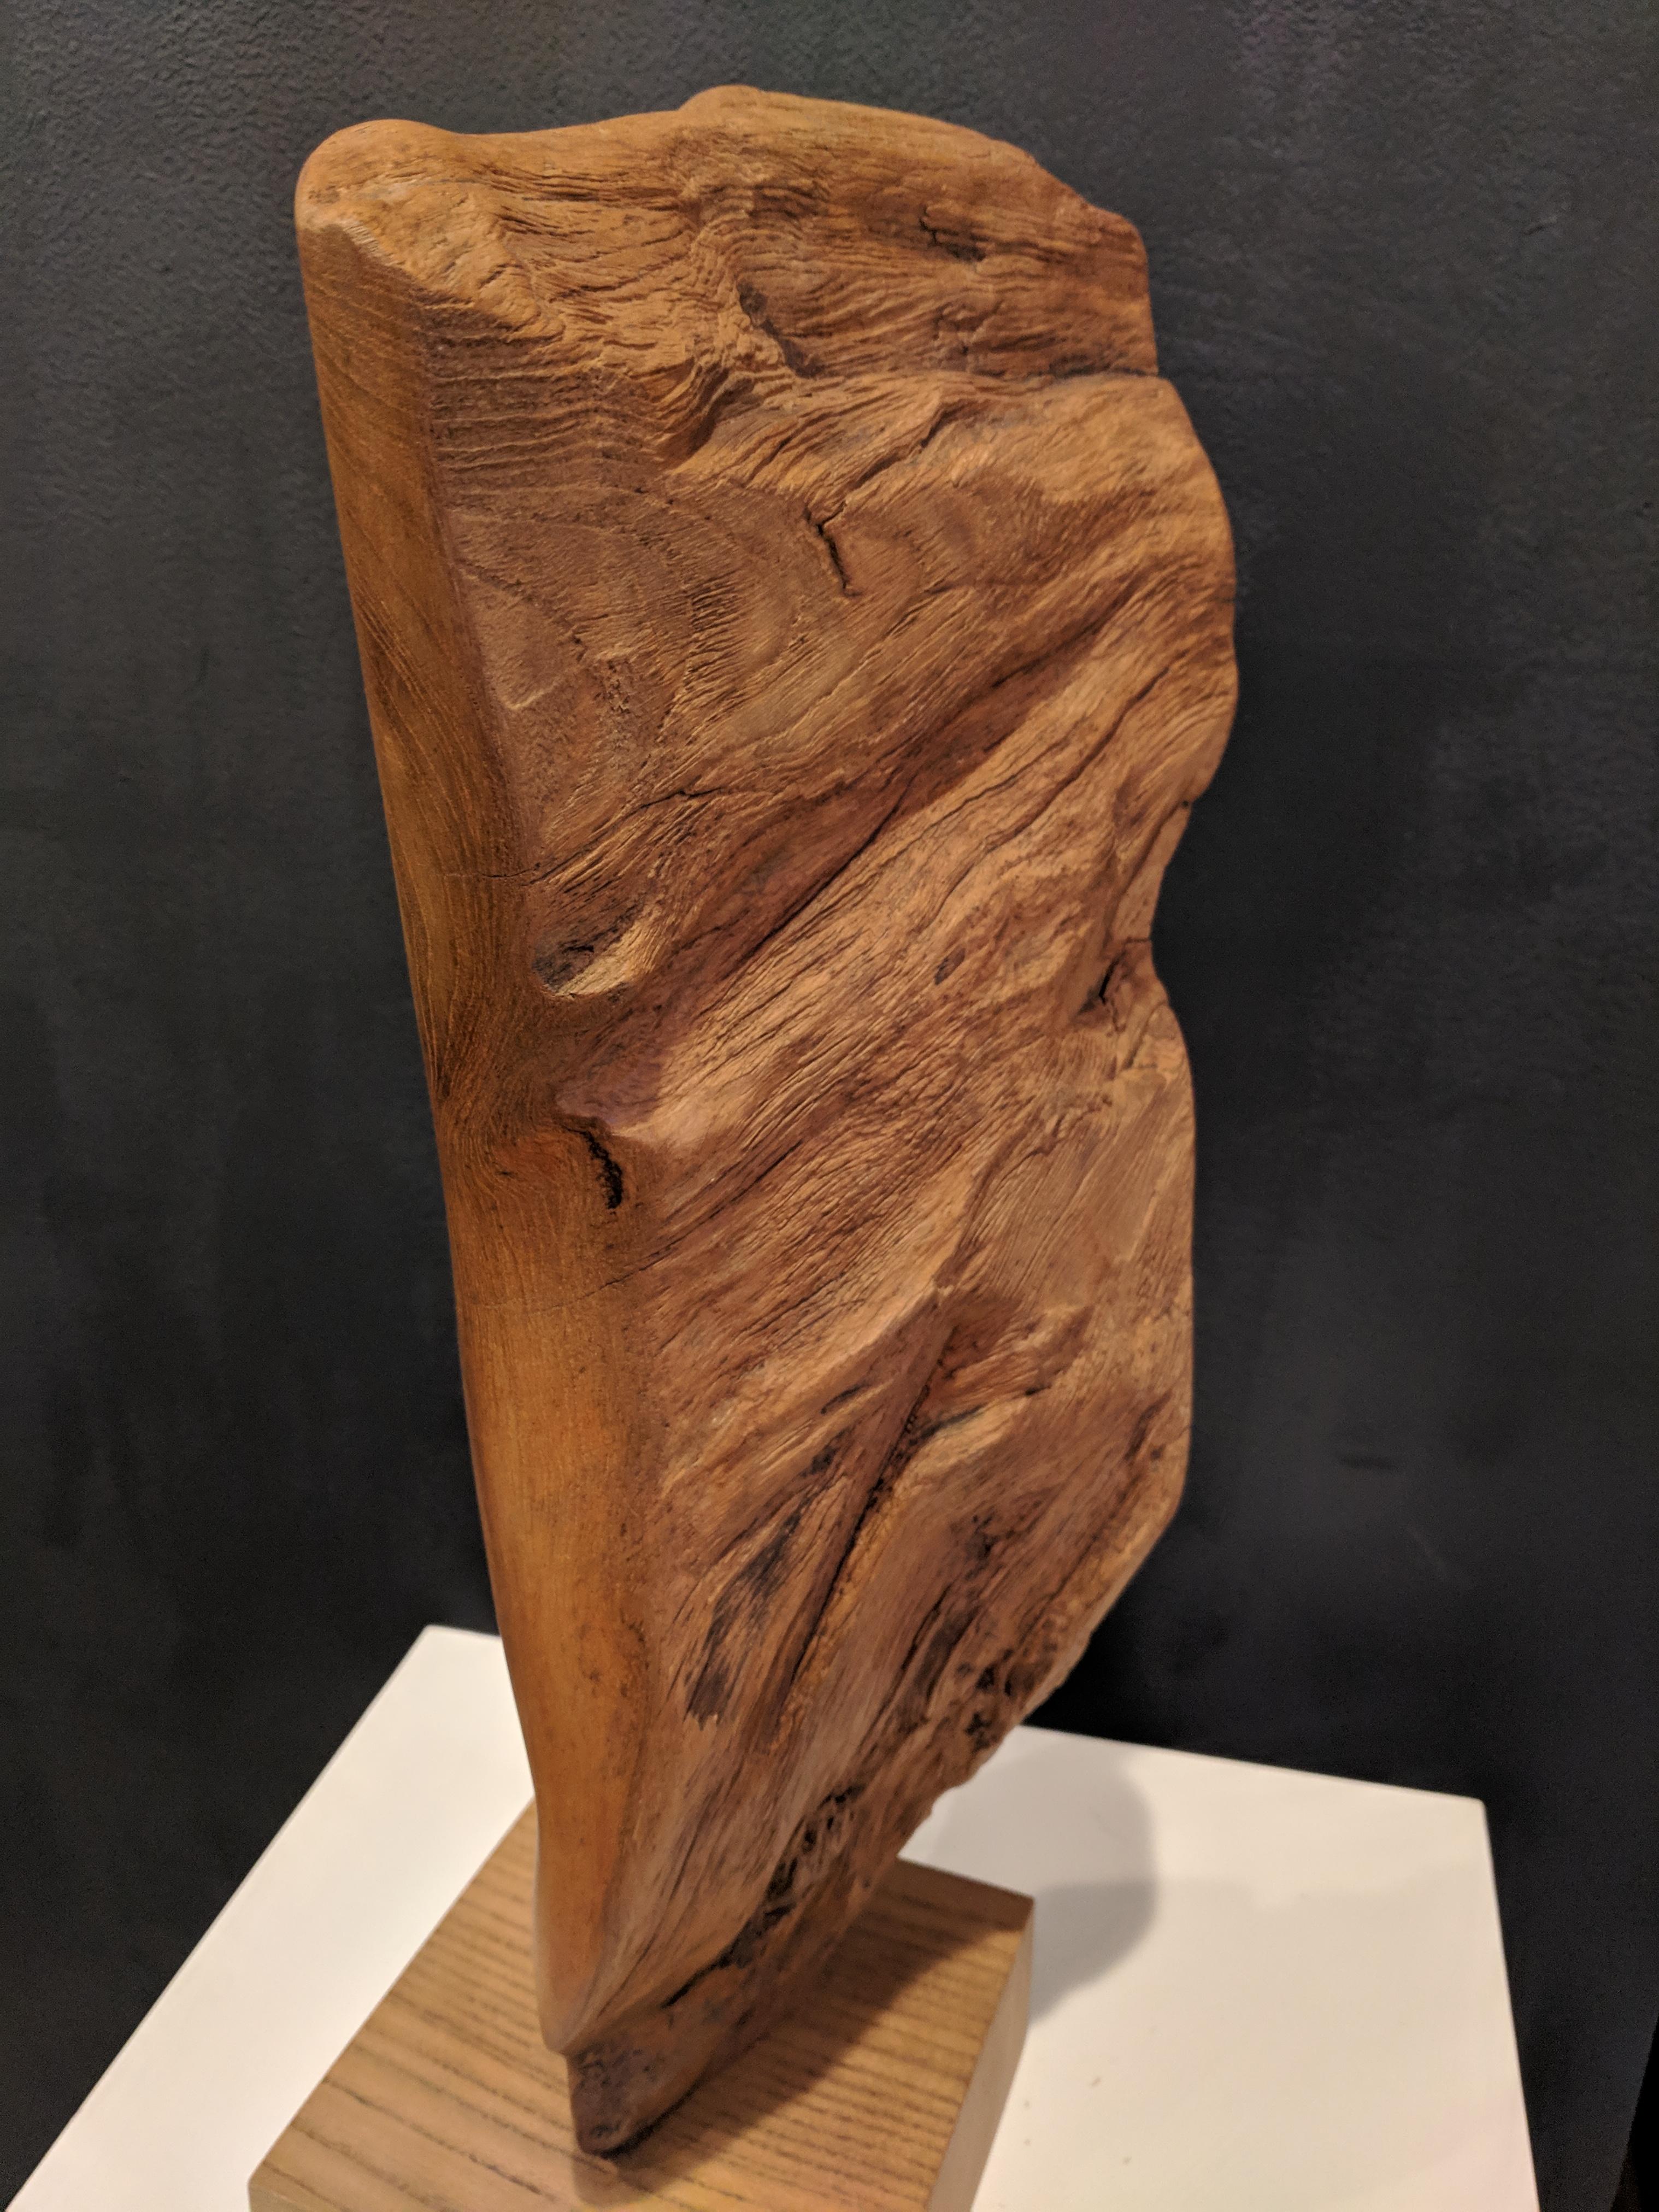 This abstract wooden sculpture is made from African Teak root on an English Windsor base. This is an organic piece in caramel colors and a variety of textures. The sculpture is a stunning and sophisticated piece, sure to draw attention.

Since